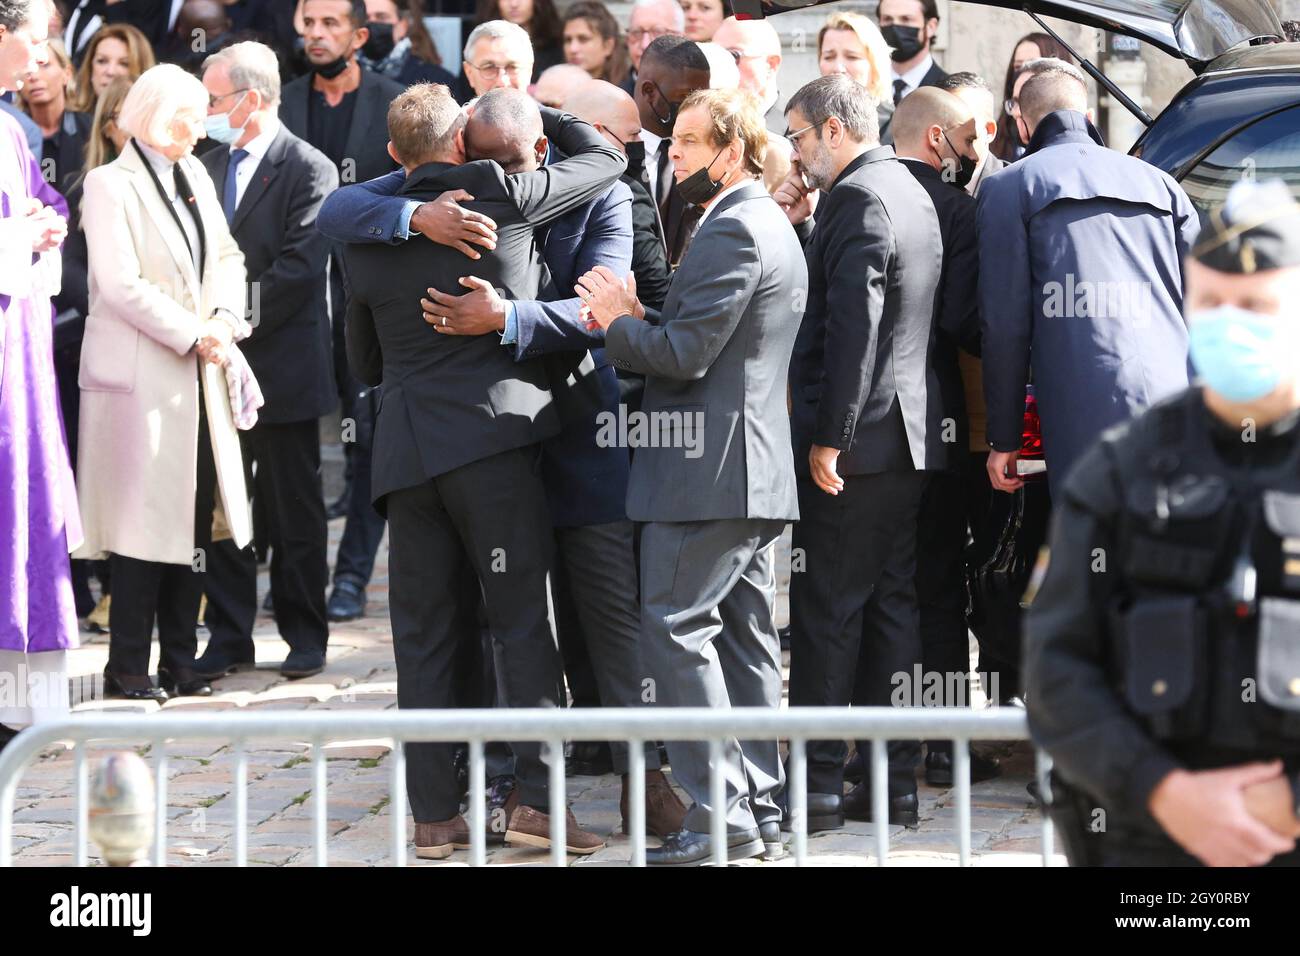 Ivorian-born French former professional footballer Basile Boli during a  tribute mass for French tycoon Bernard Tapie at Saint Germain des Pres  church in Paris, France on October 6, 2021. The funeral will